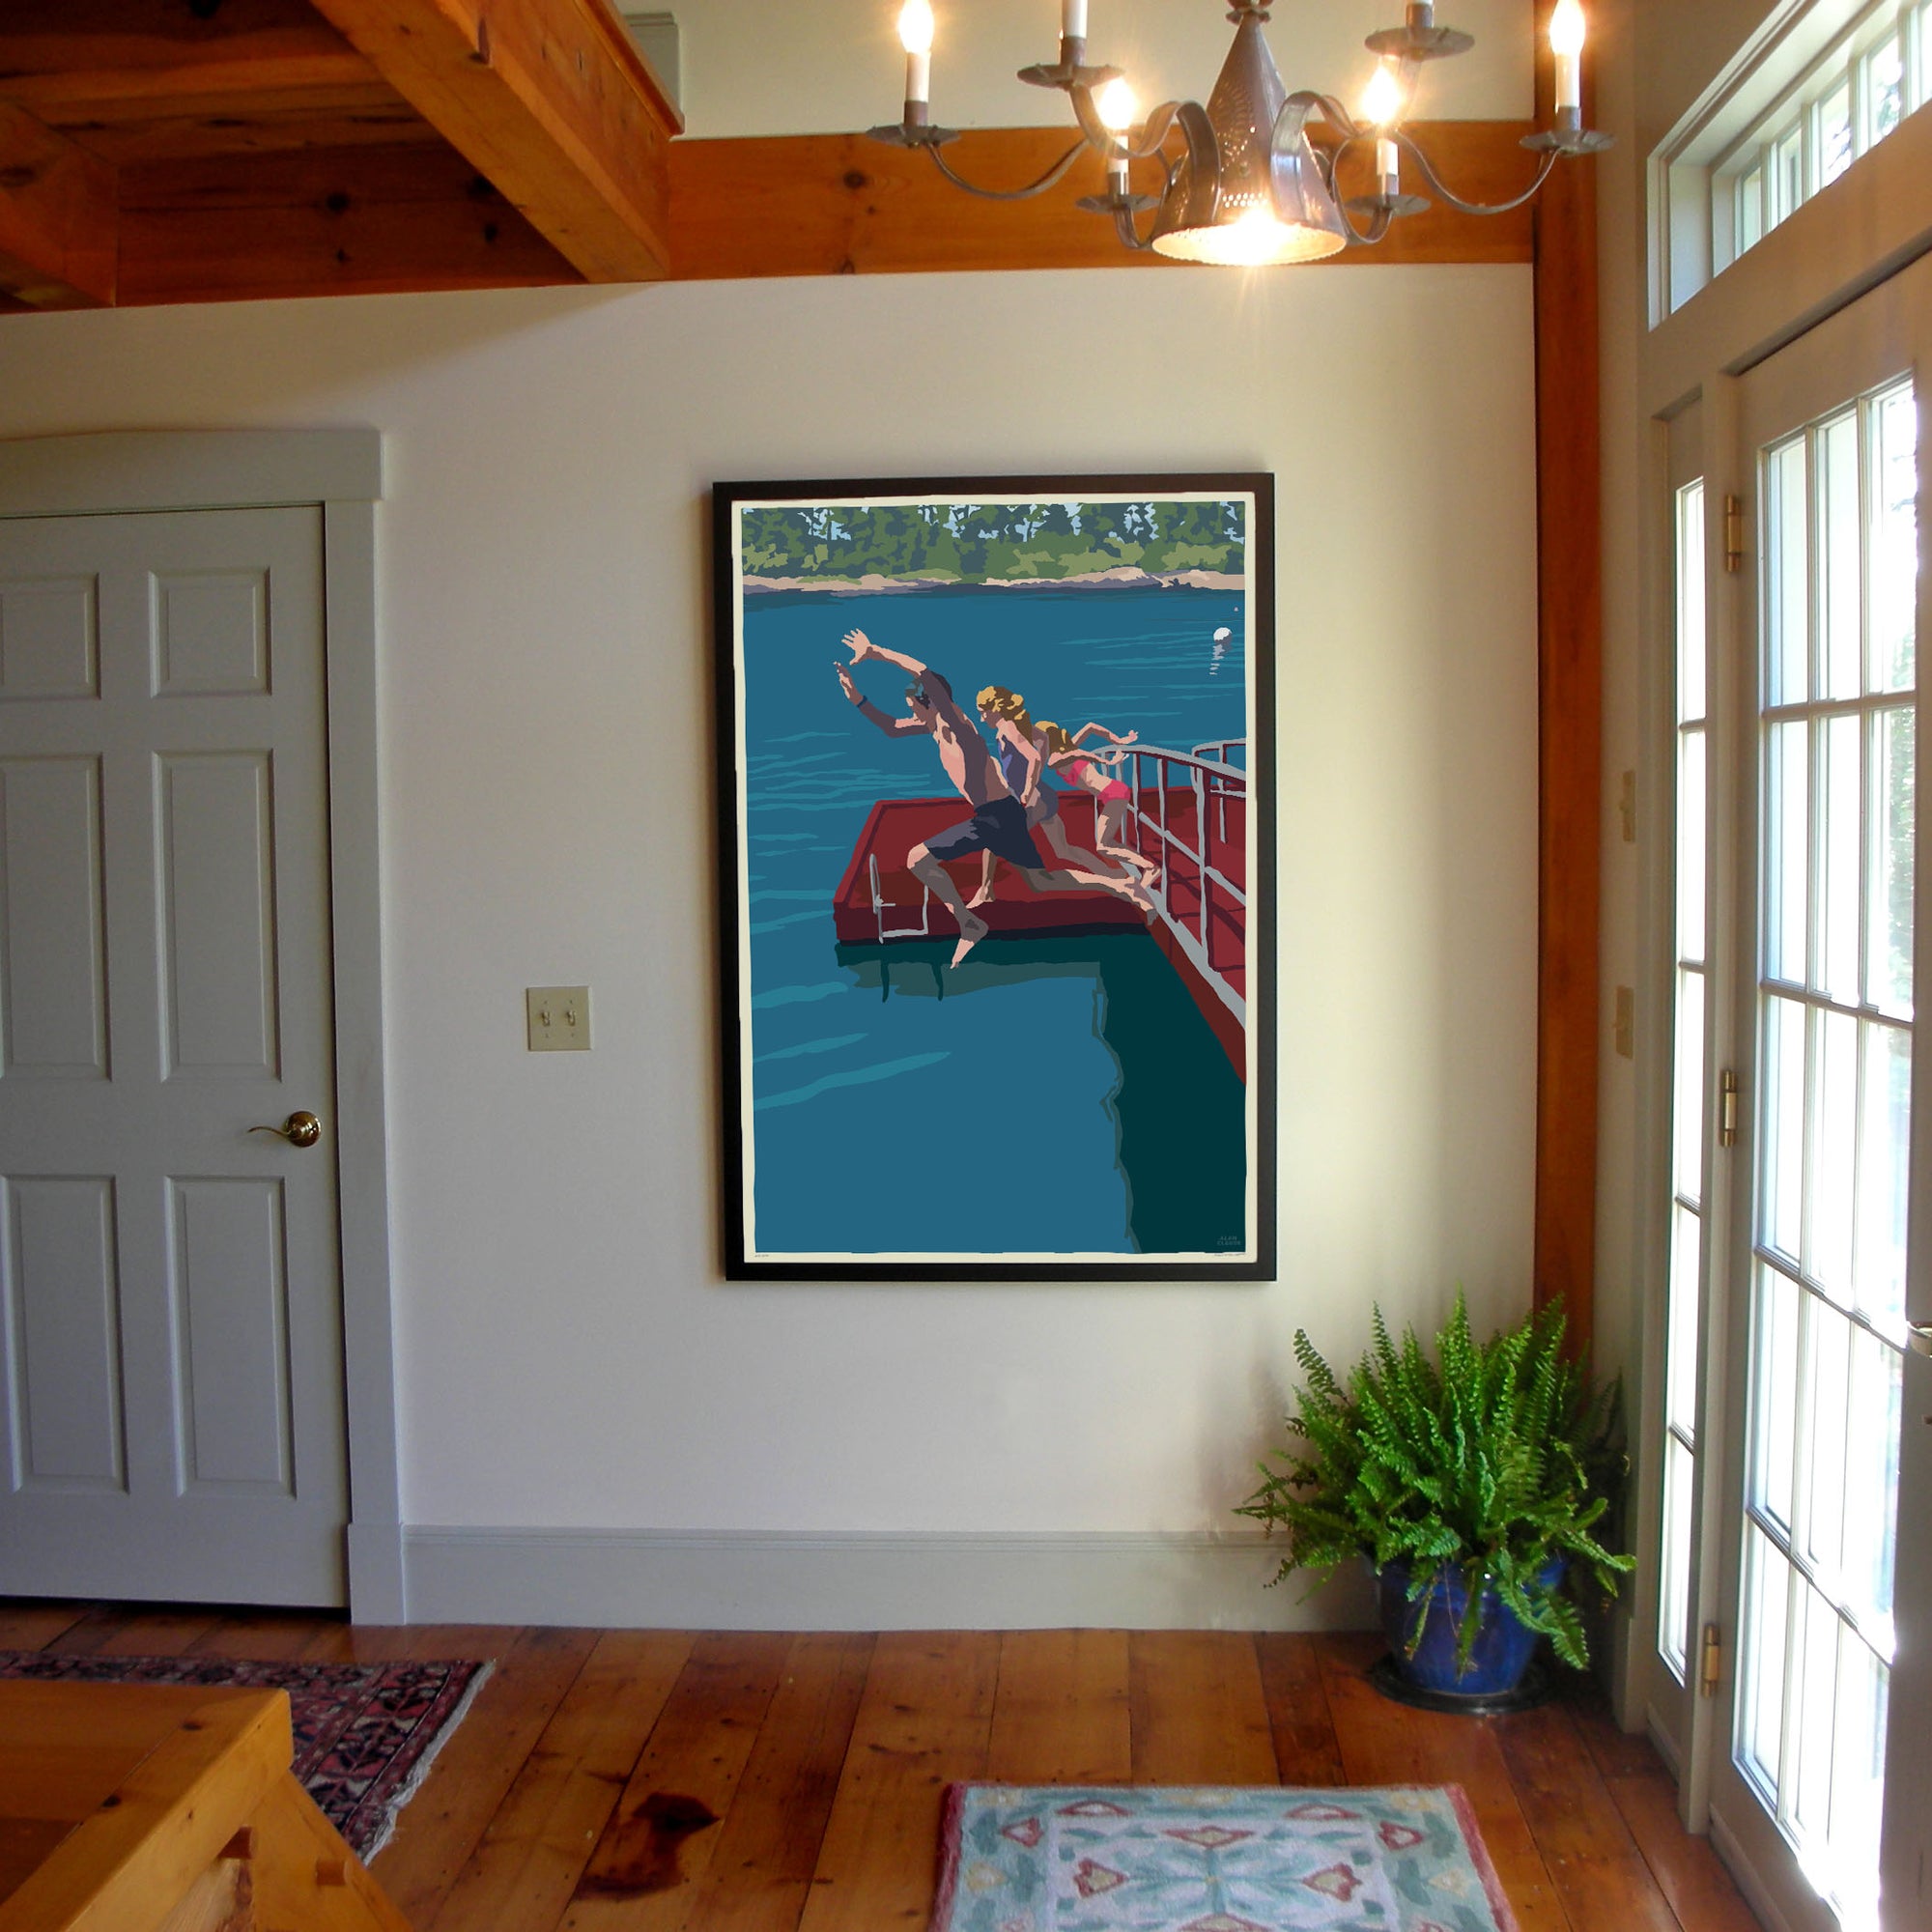 Go Jump In A Lake Art Print 36" x 53" Framed Wall Poster By Alan Claude - Maine